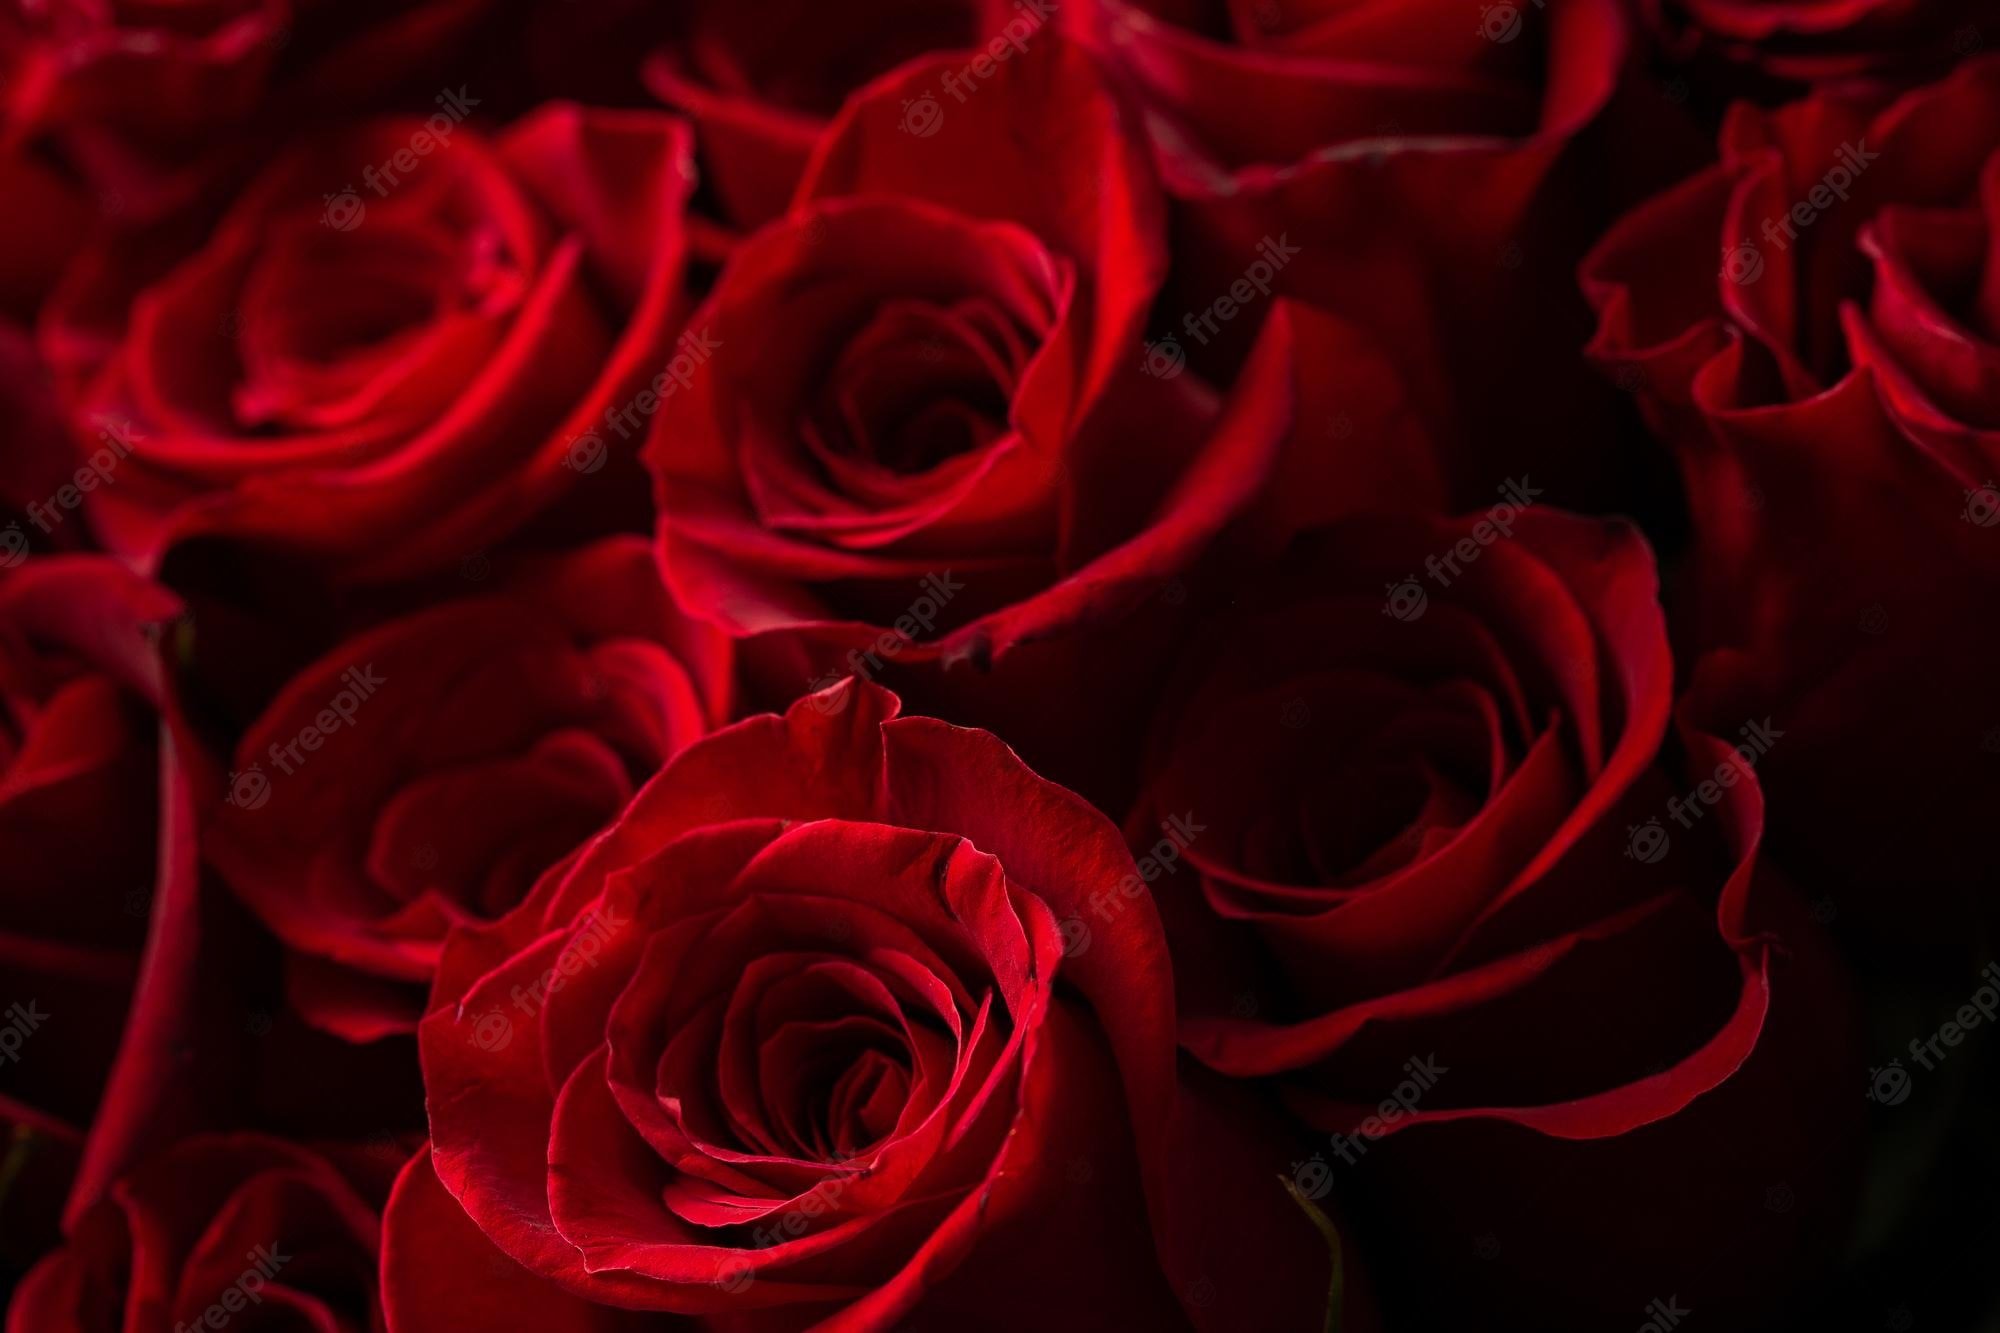 Premium Photo. Bouquet of beautiful red roses trend color classic red valentine's day selective focus roses wallpaper background